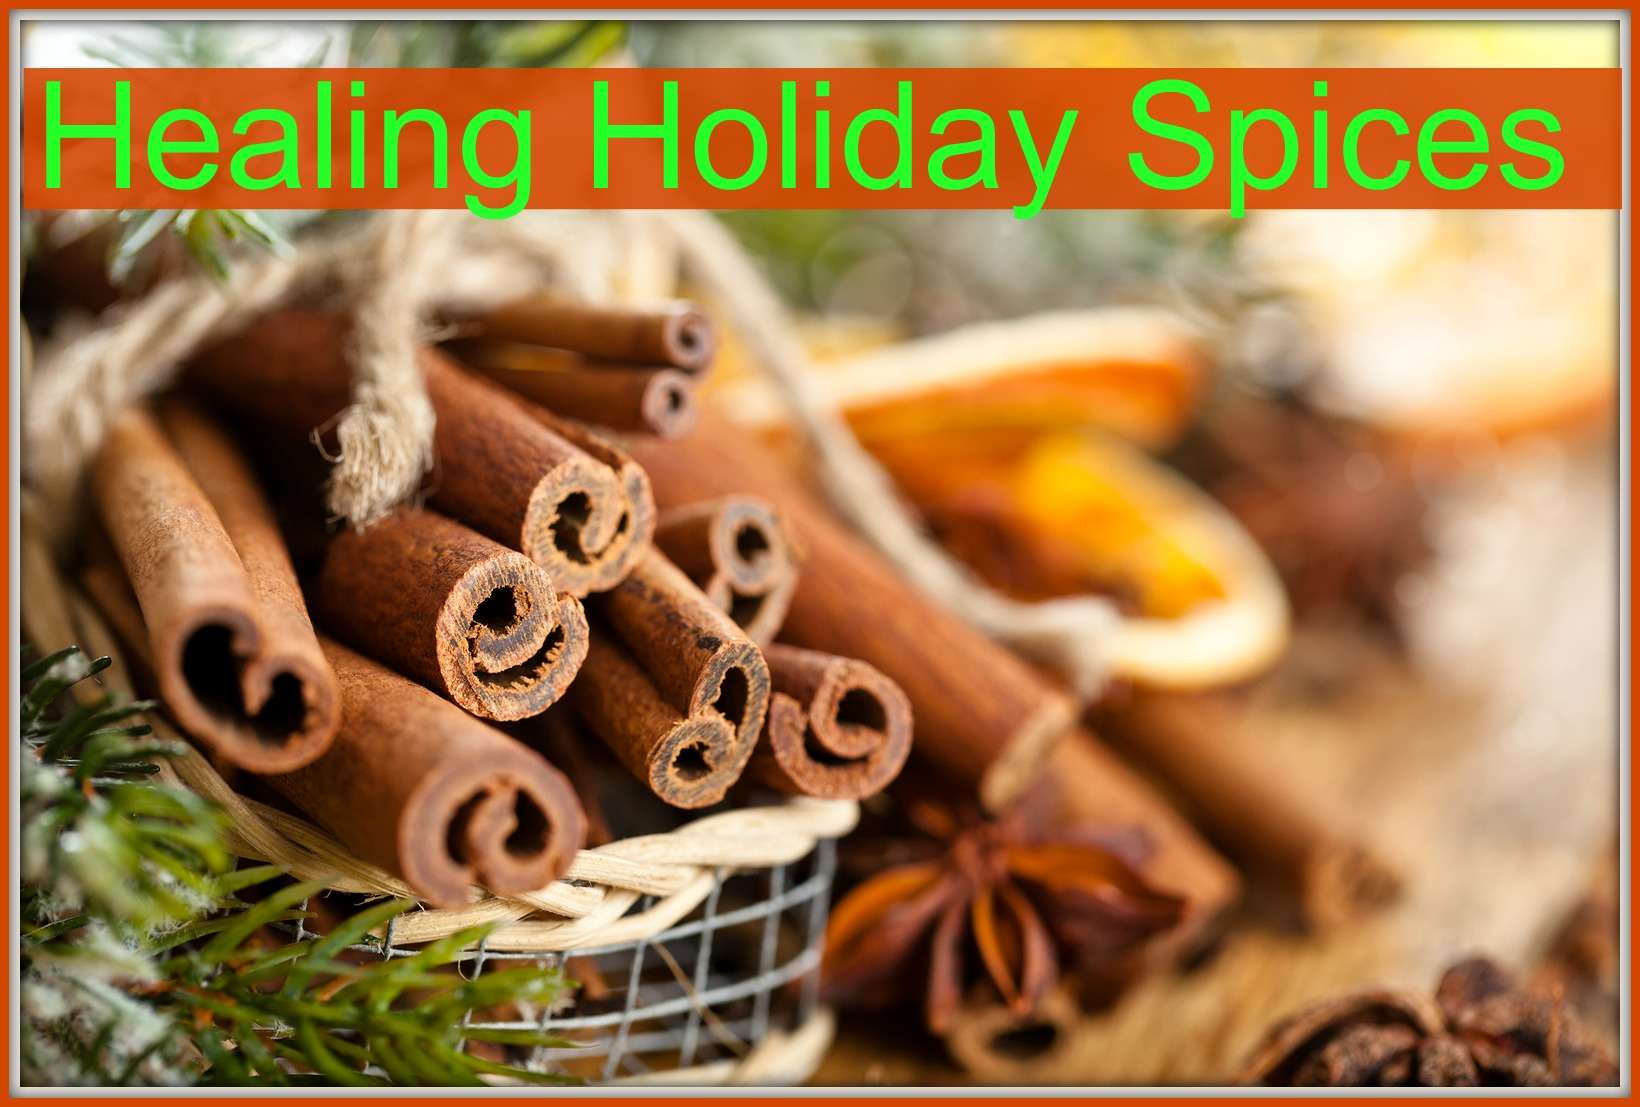 Healing Holiday Spices in a Basket